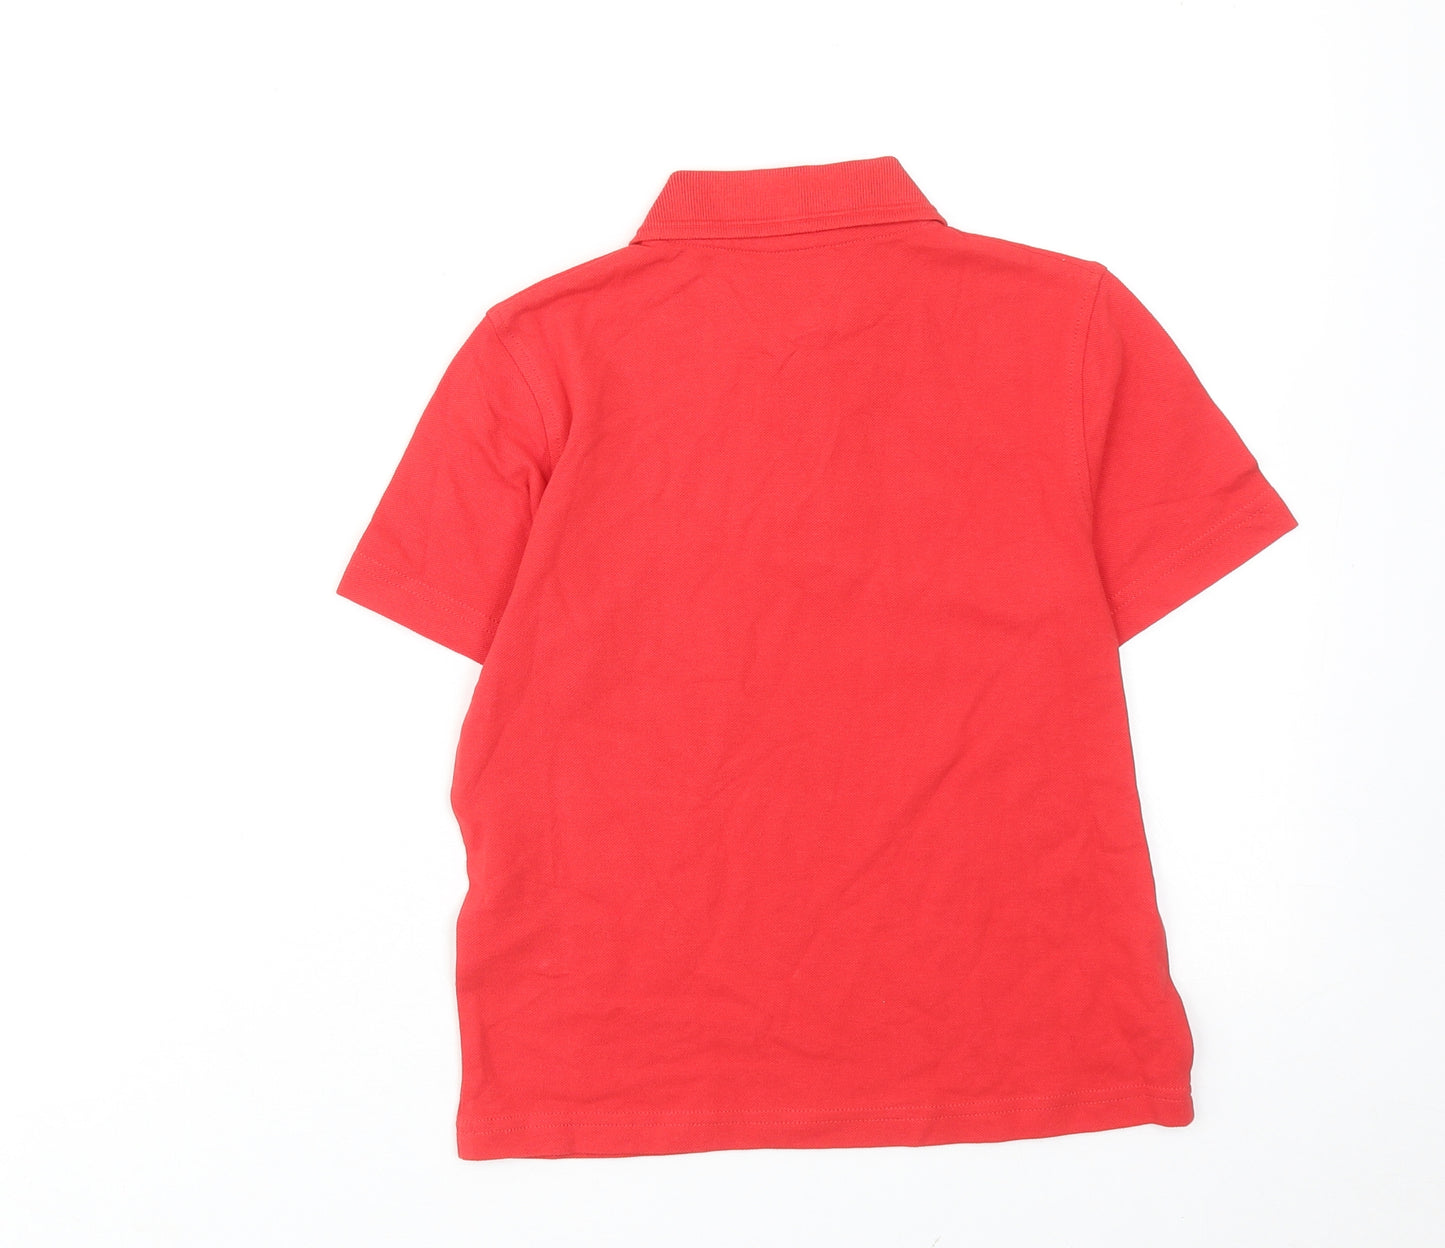 Marks and Spencer Boys Red Cotton Basic Polo Size 10-11 Years Collared Button